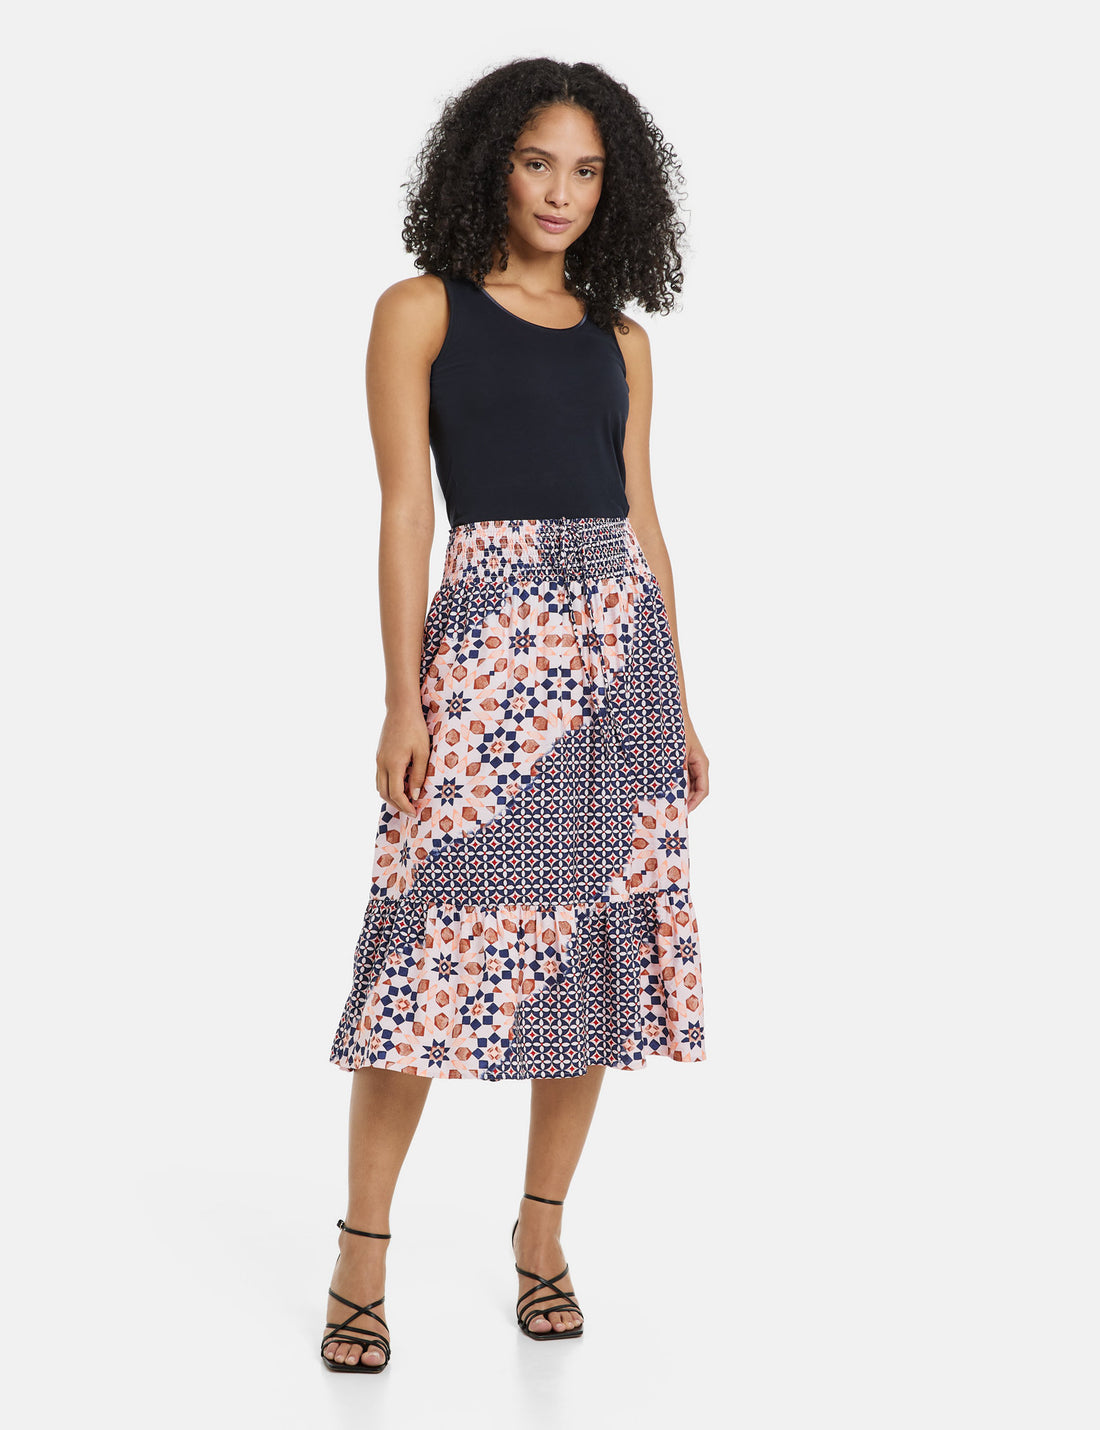 Patterned Midi Skirt With A Stretch Waistband_310030-31536_9088_01